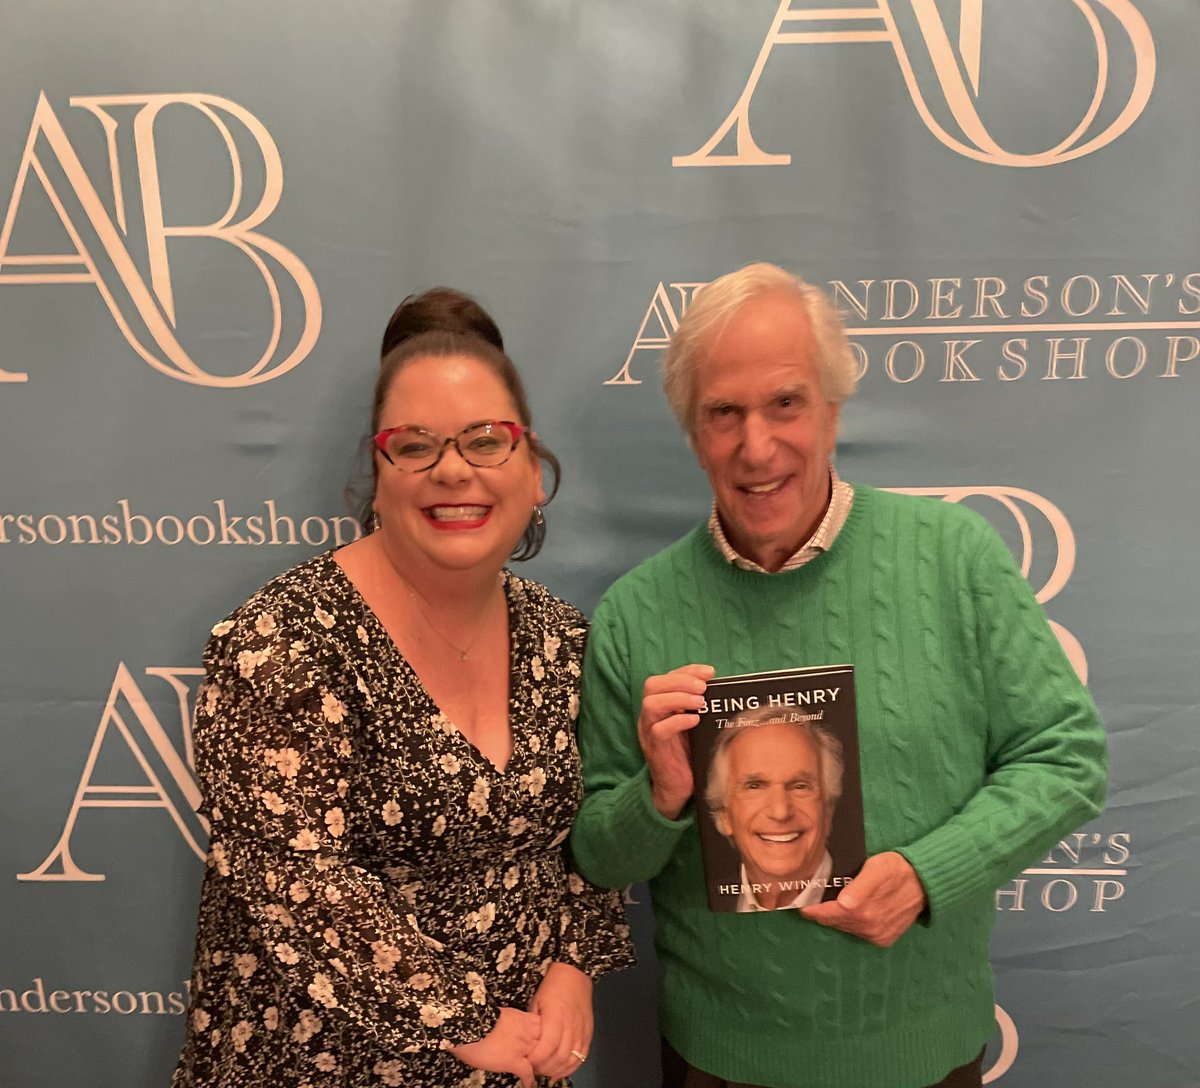 Beth: It was such an honor to listen to @hwinkler4real talk about his new book Being Henry and share his stories. He’s inspiring. I had no idea he was an EP for #macguyver! We reviewed Lost Treasure of Atlantis in ‘22. #thefonz #henrywinkler #mftvmcpodcast